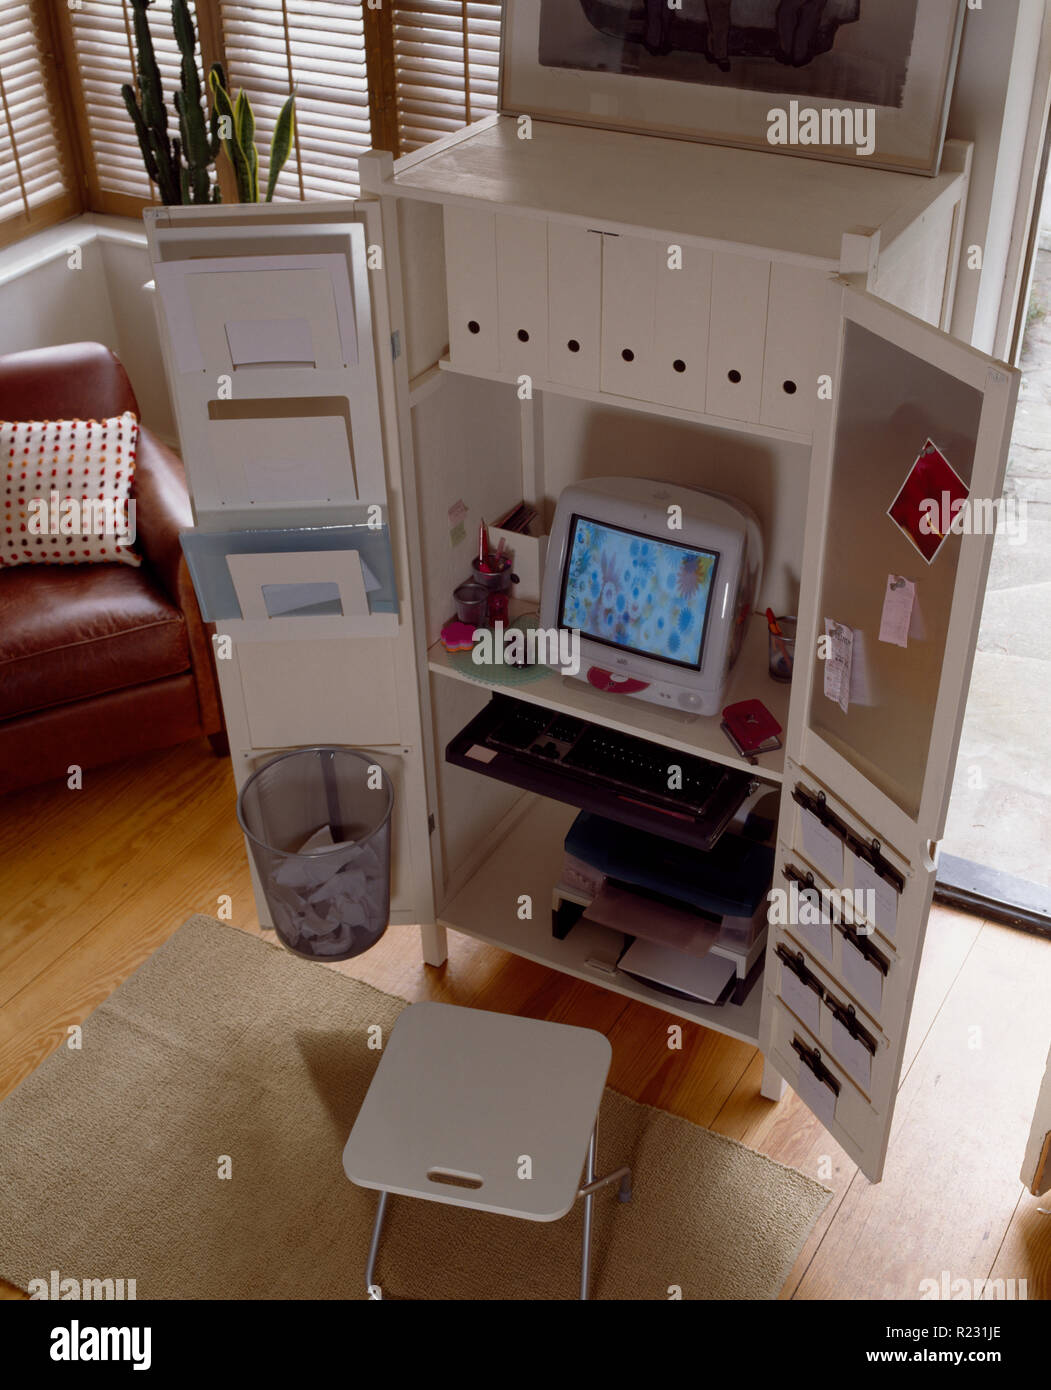 Close-up of a home office in a cupboard Stock Photo